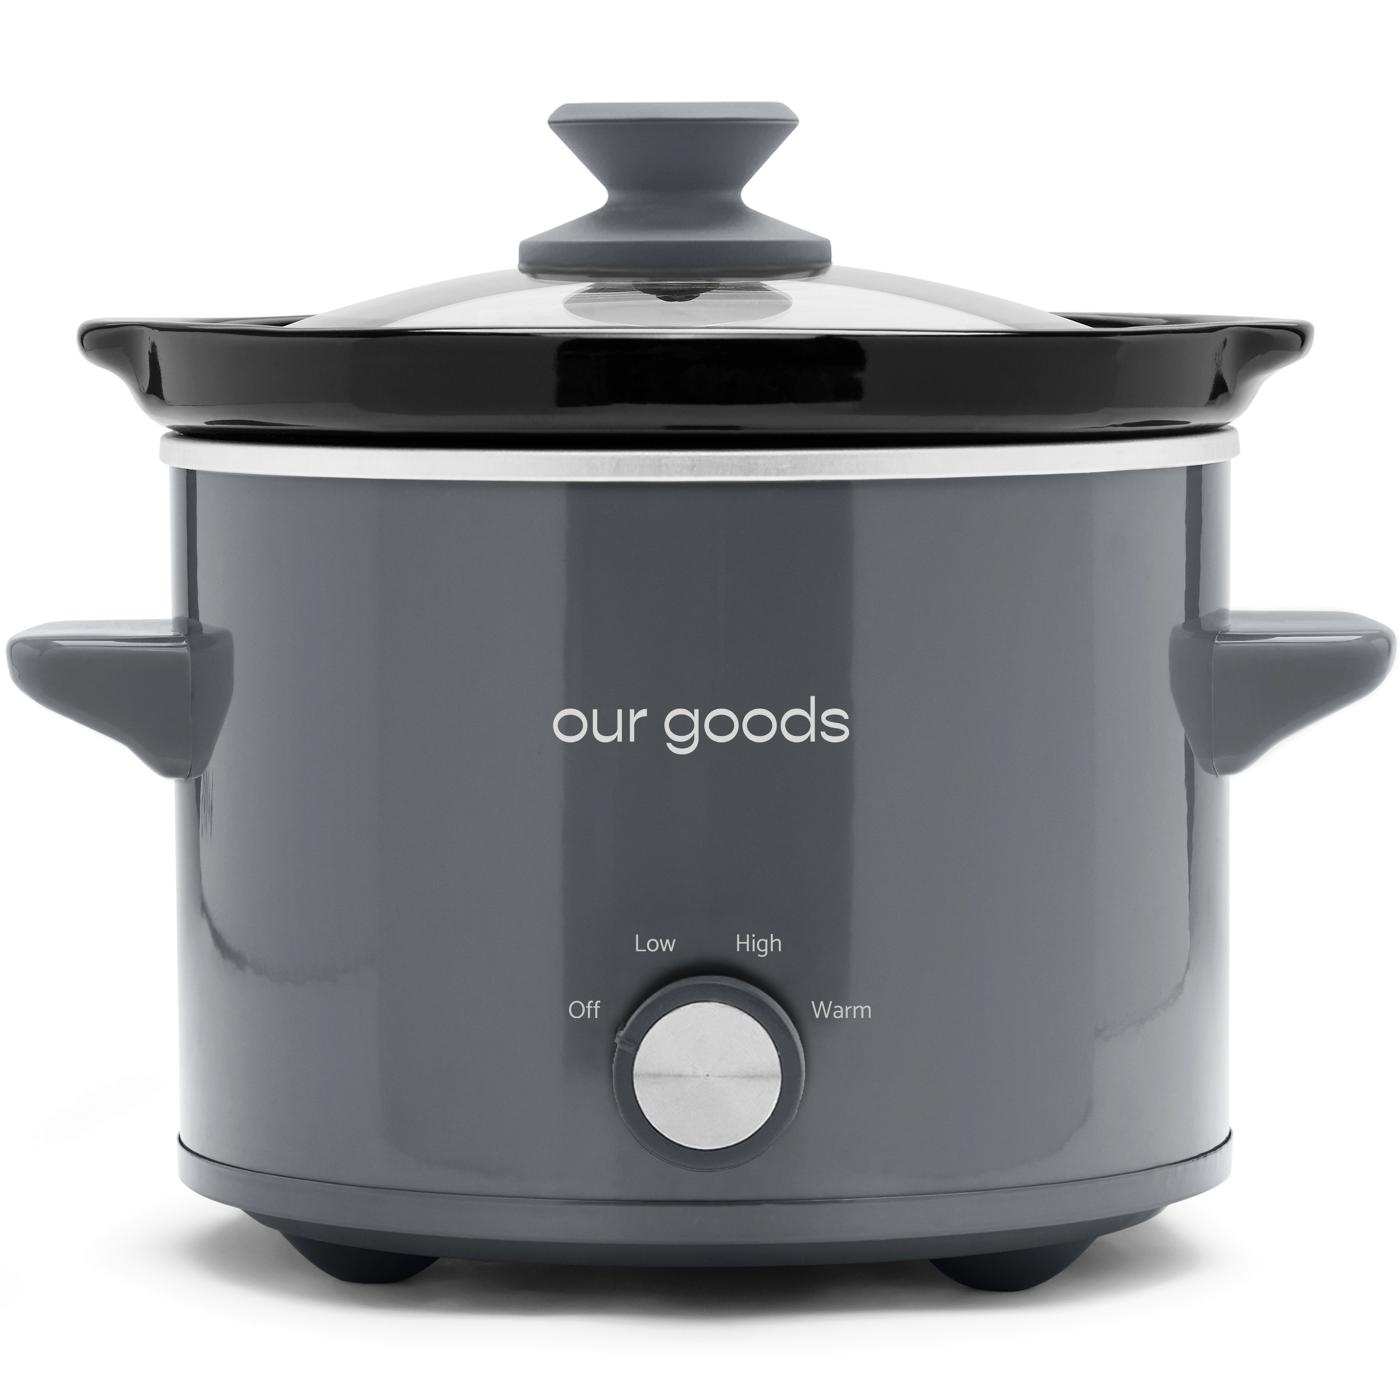 Help, is my crockpot too small? : r/slowcooking